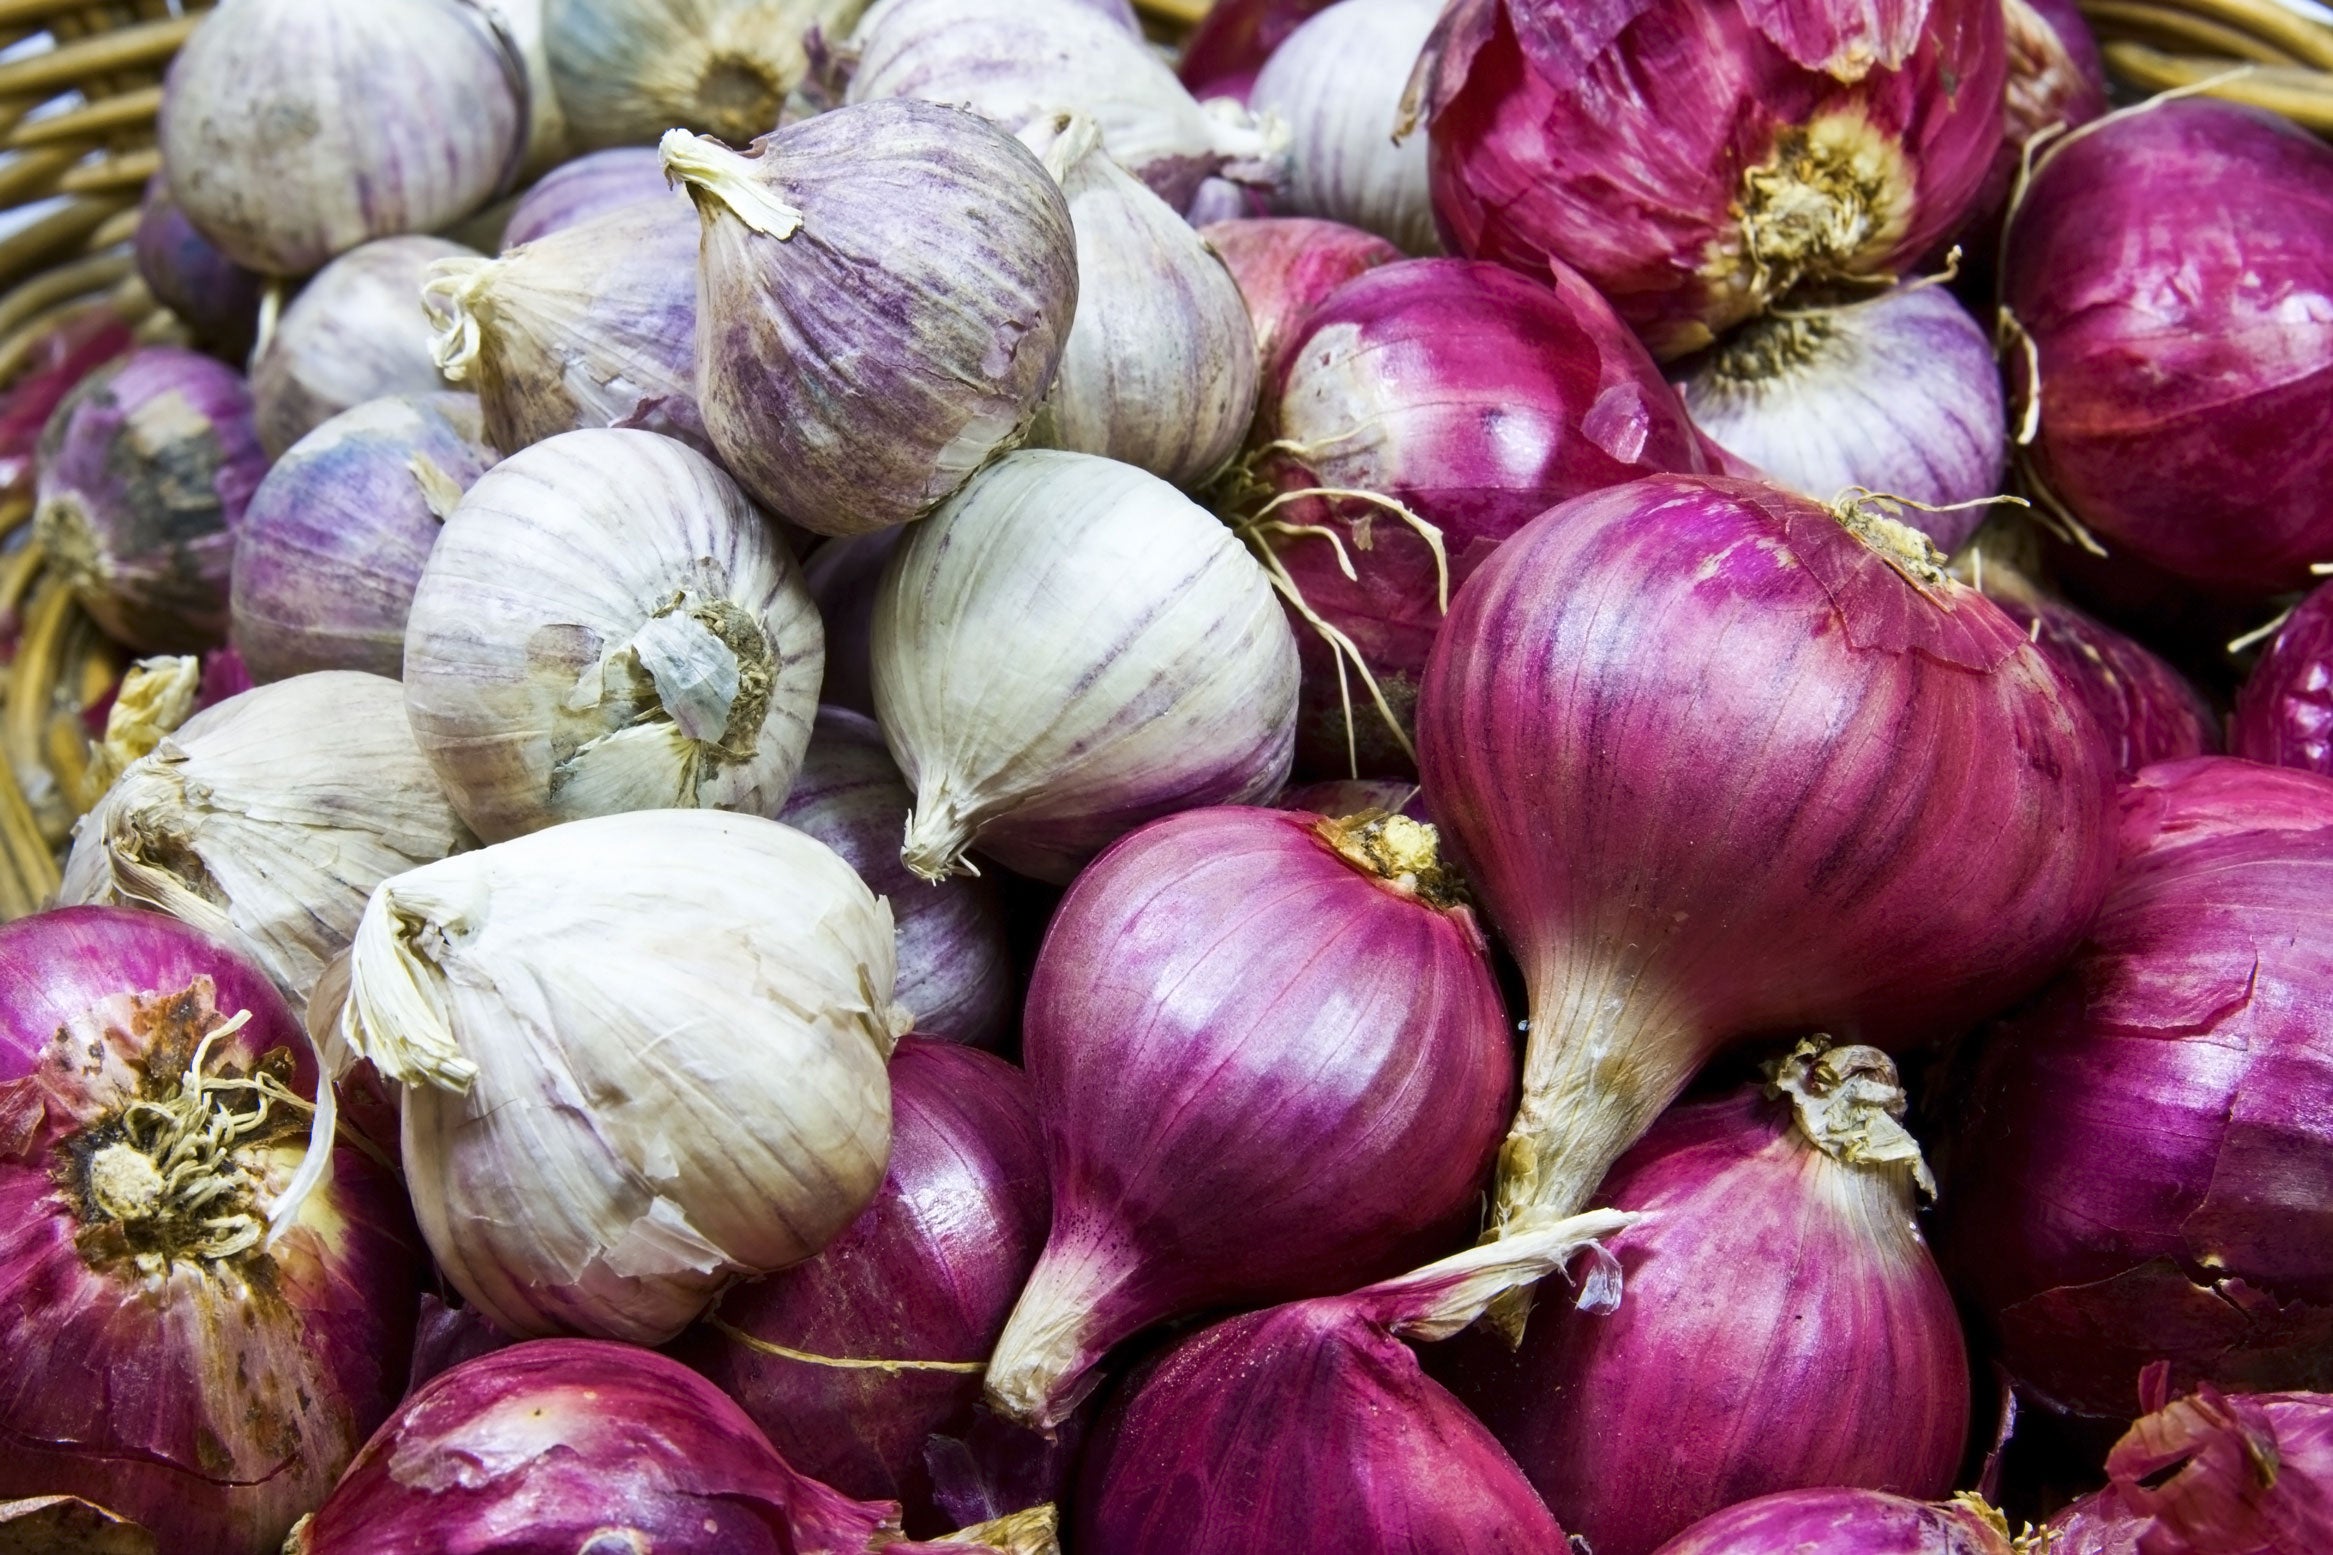 How to Grow Garlic and Shallots